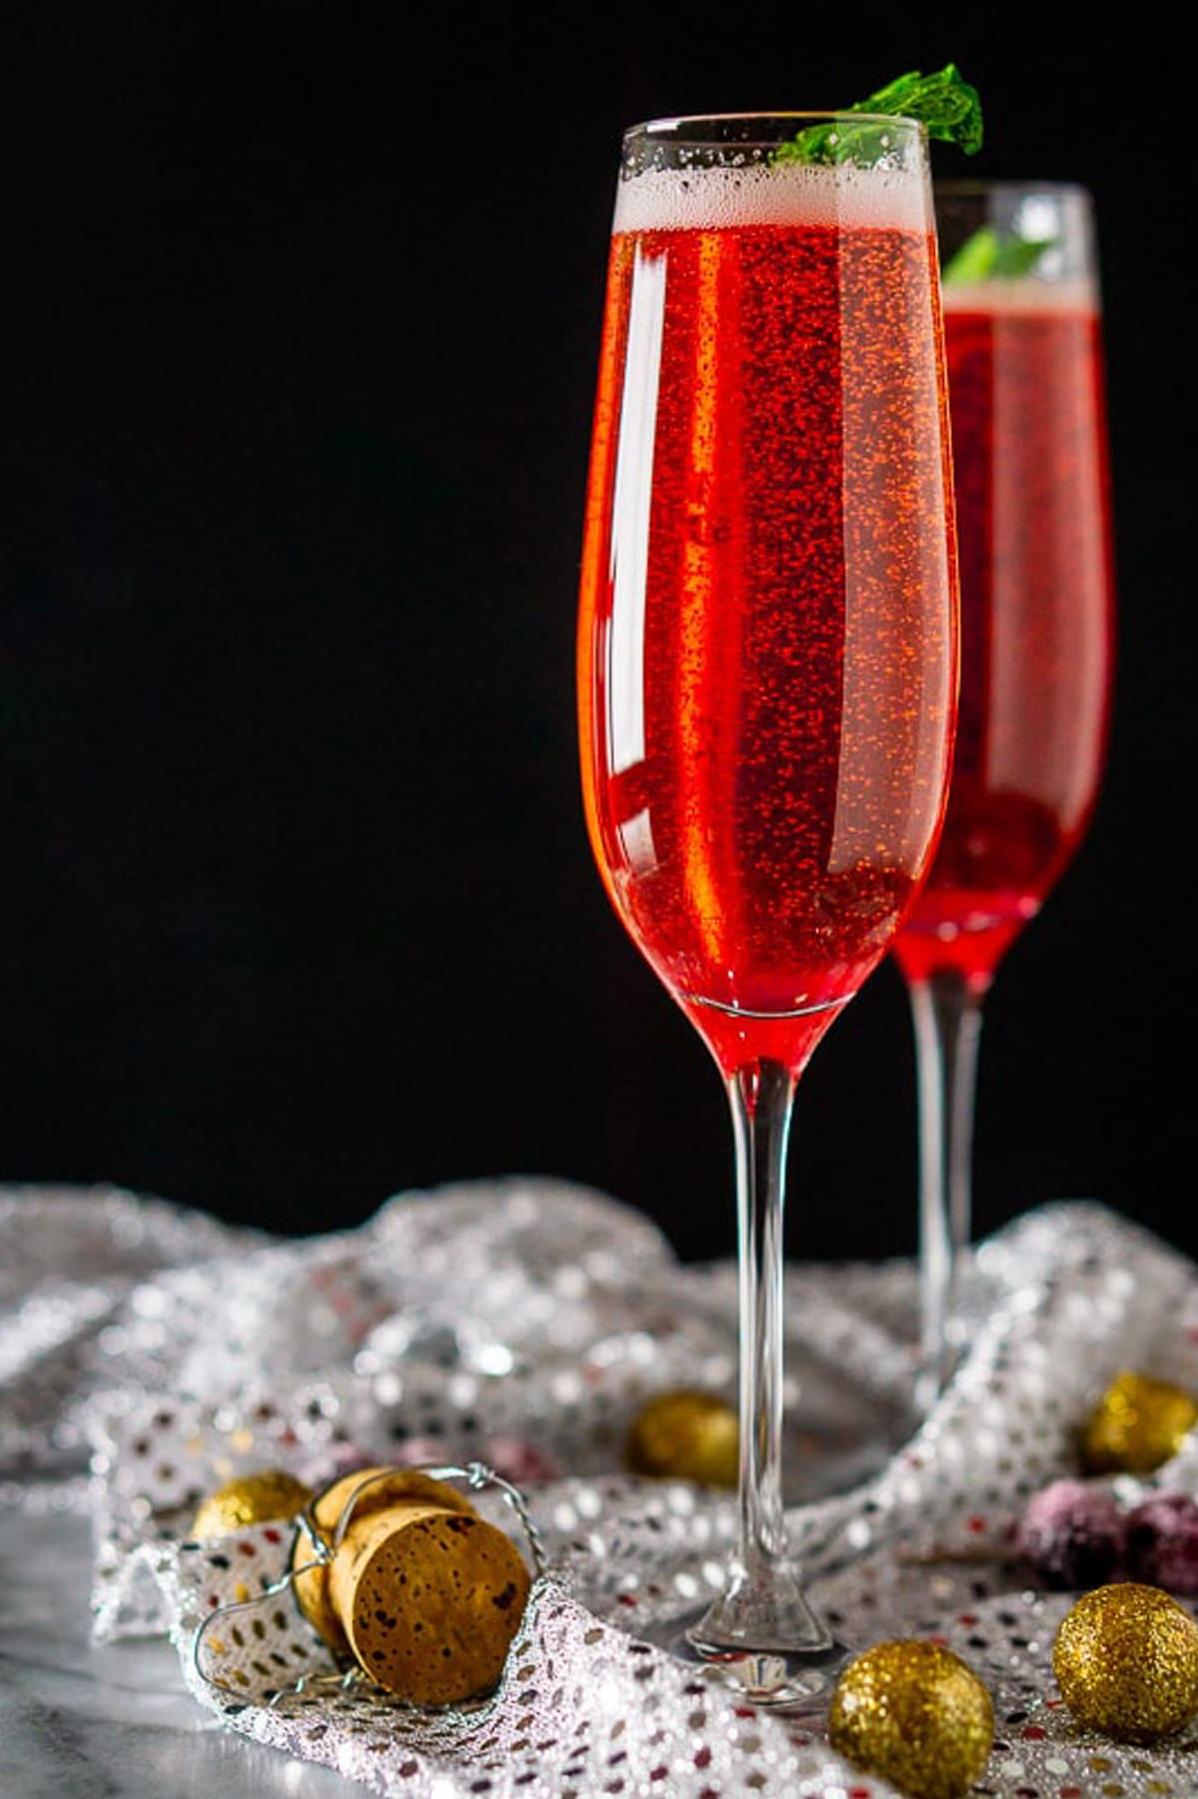  Champagne just got a cranberry dressed-up upgrade.